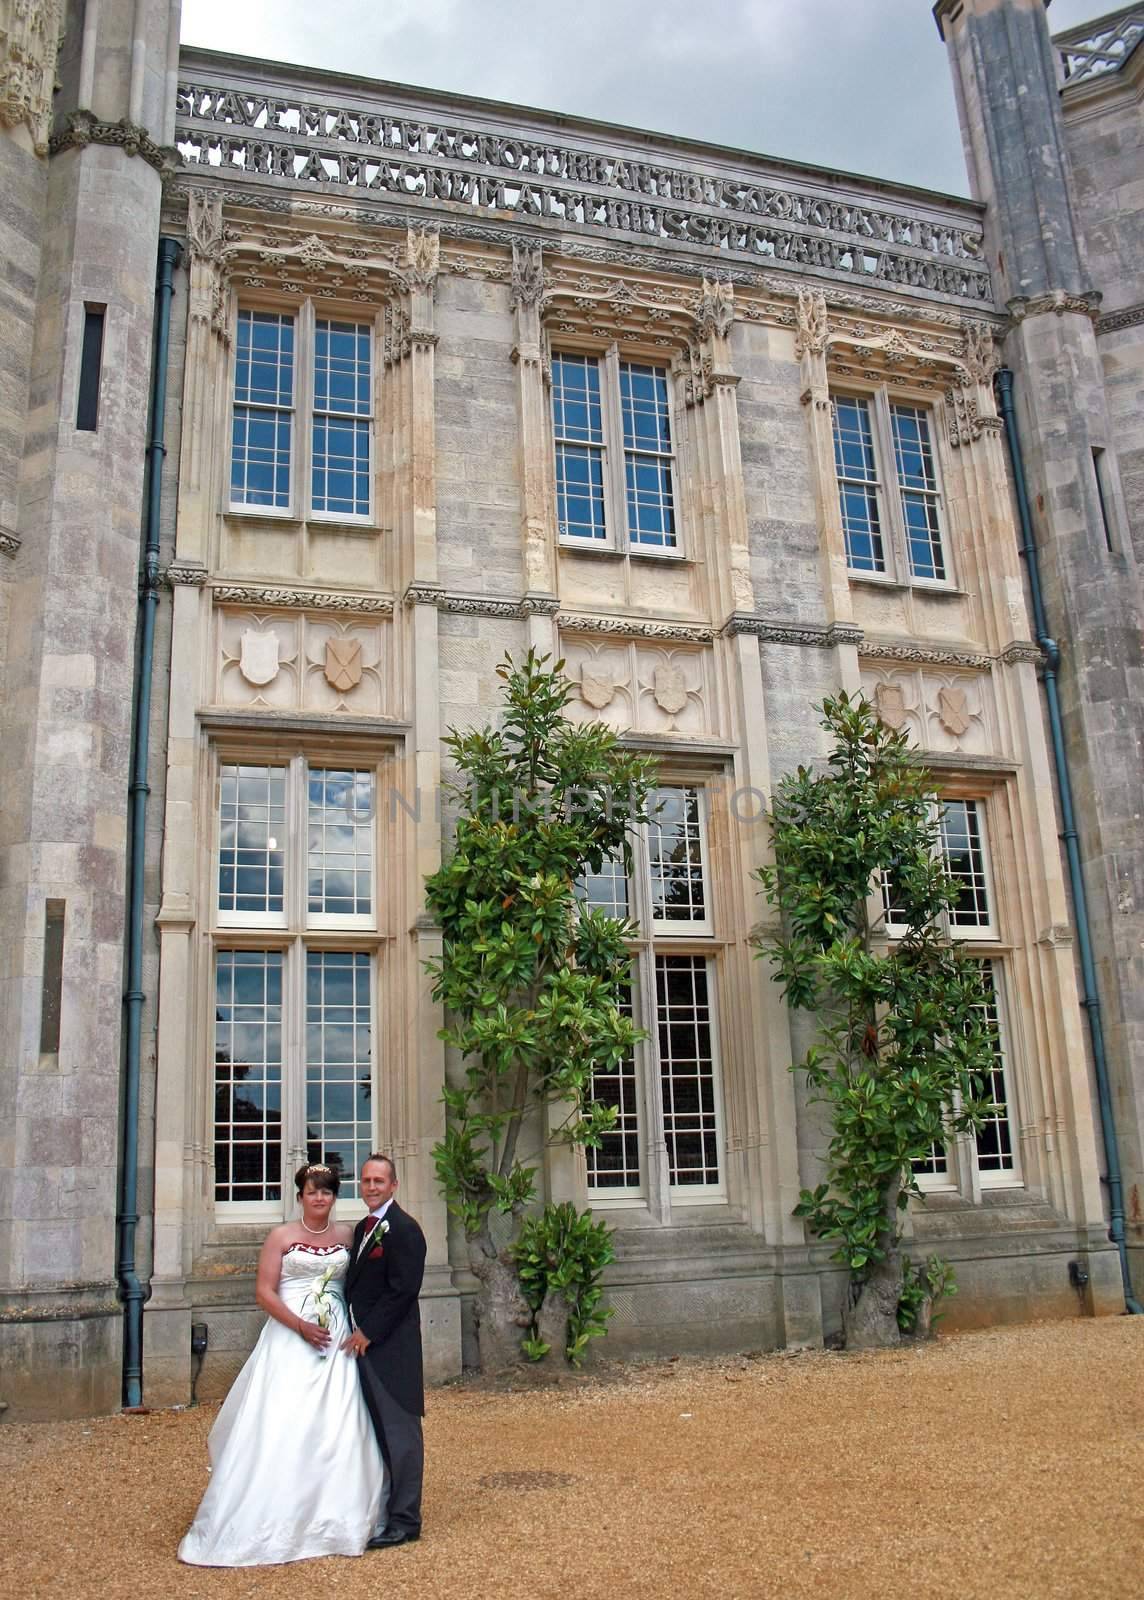 The Bride and Groom outside an Historic Building.